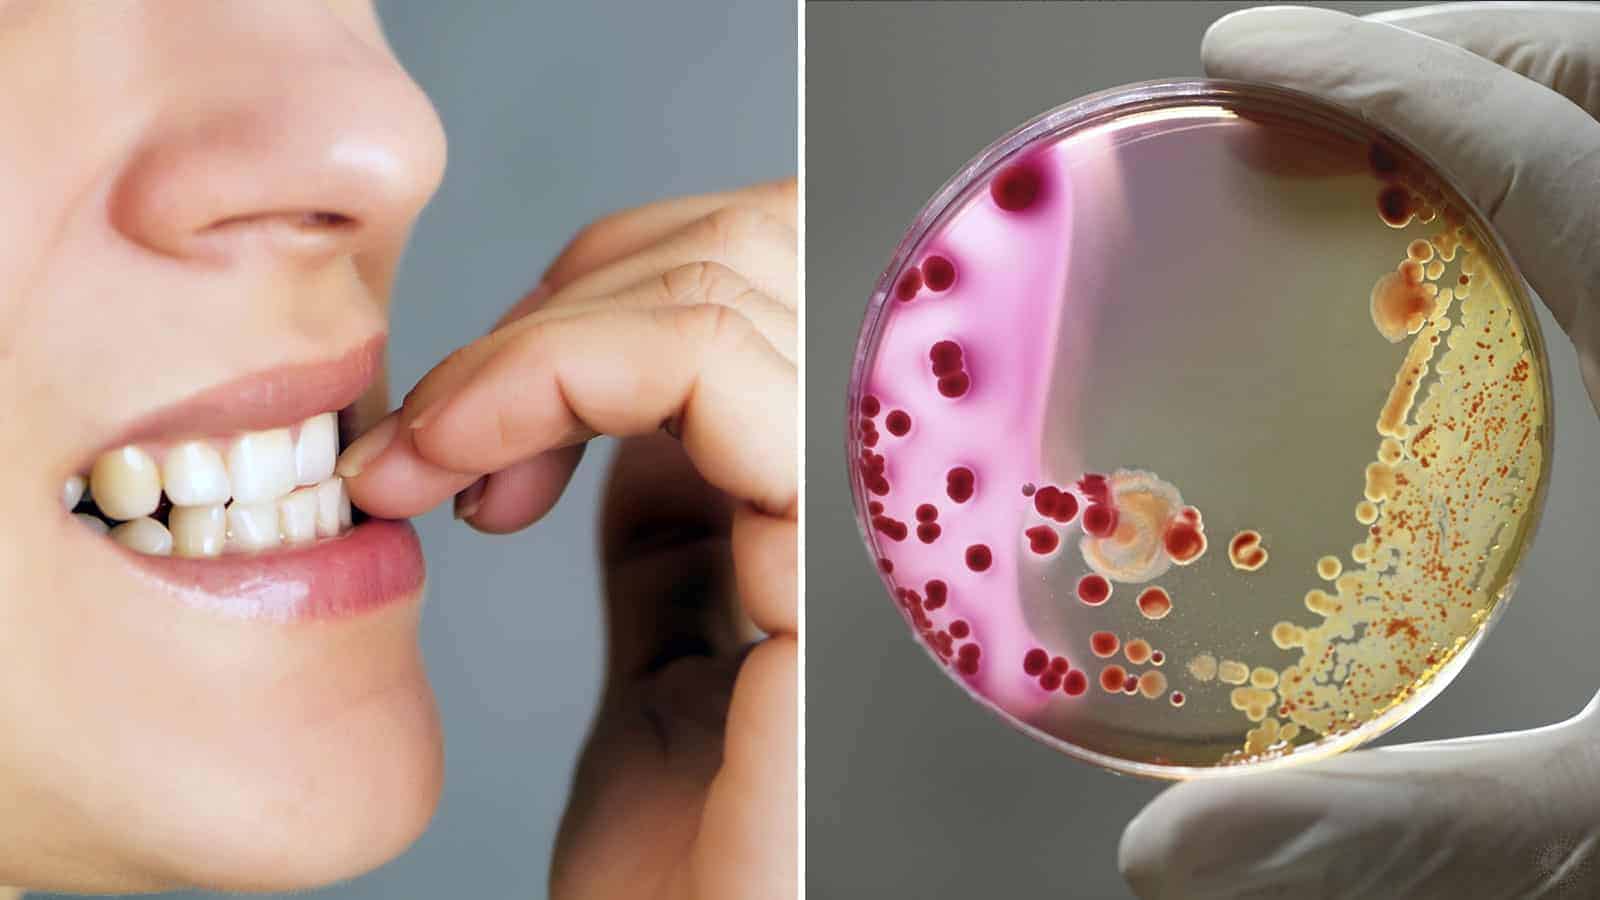 Doctors Explain 15 Habits That Can Increase Your Risk of Viral Infections